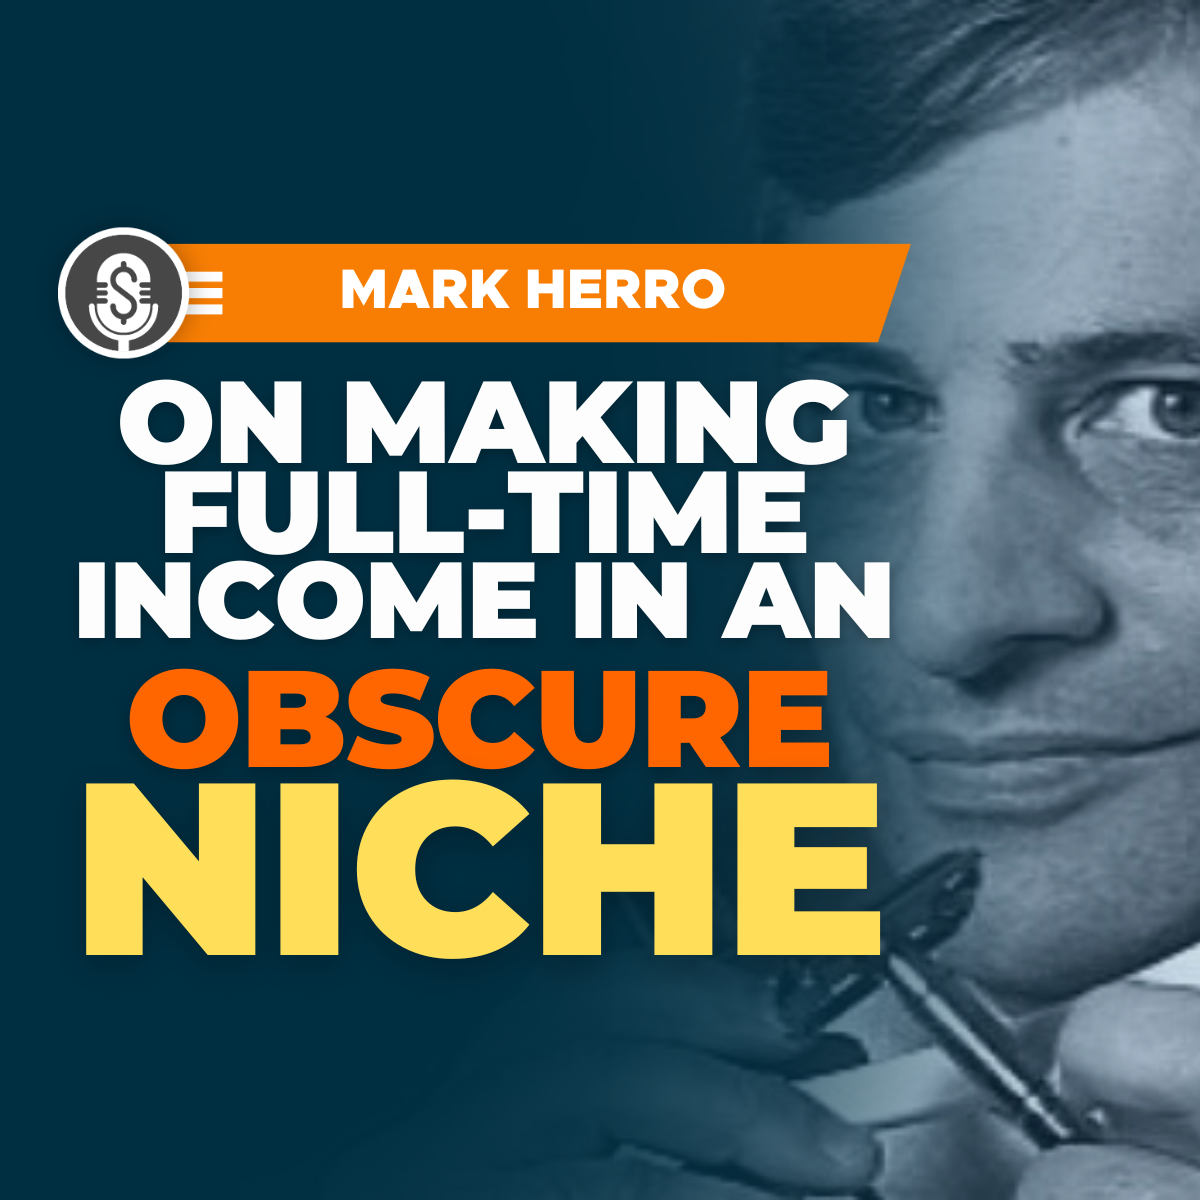 Mark Herro on making full-time income in an obscure niche